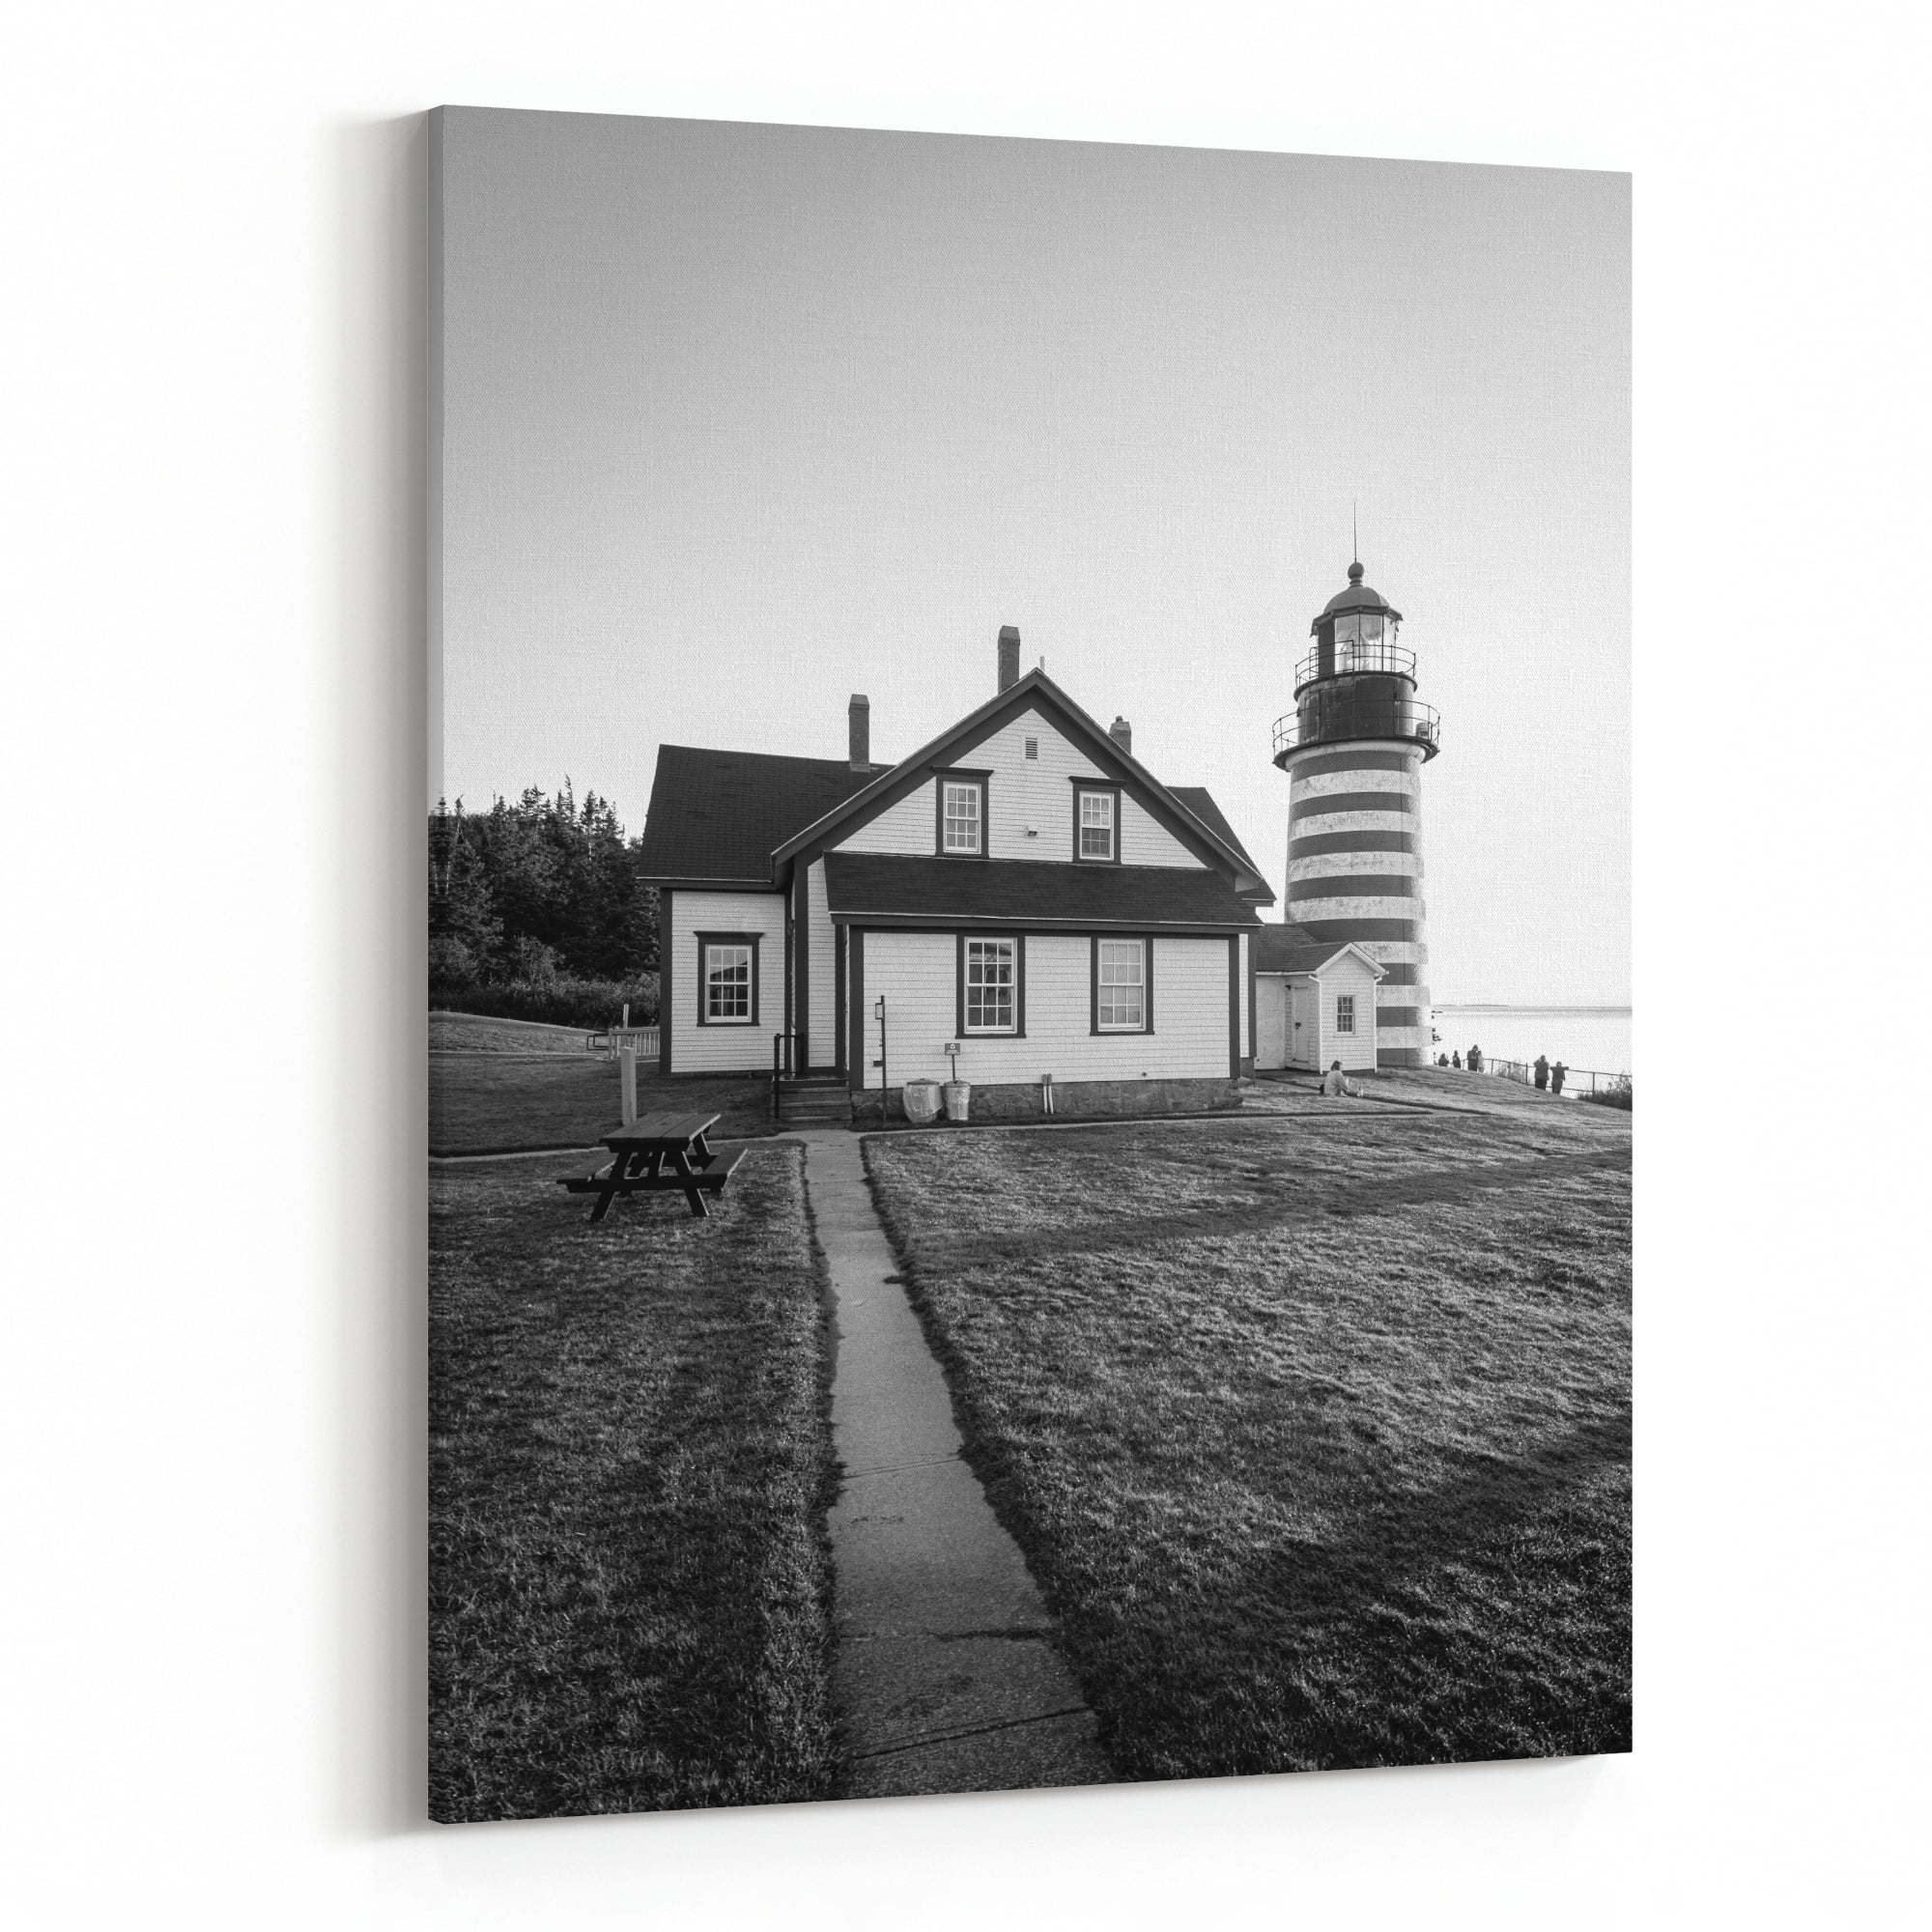 12"x16"Maines lighthouse HD Canvas Print Painting Home Decor Wall Art Pictures